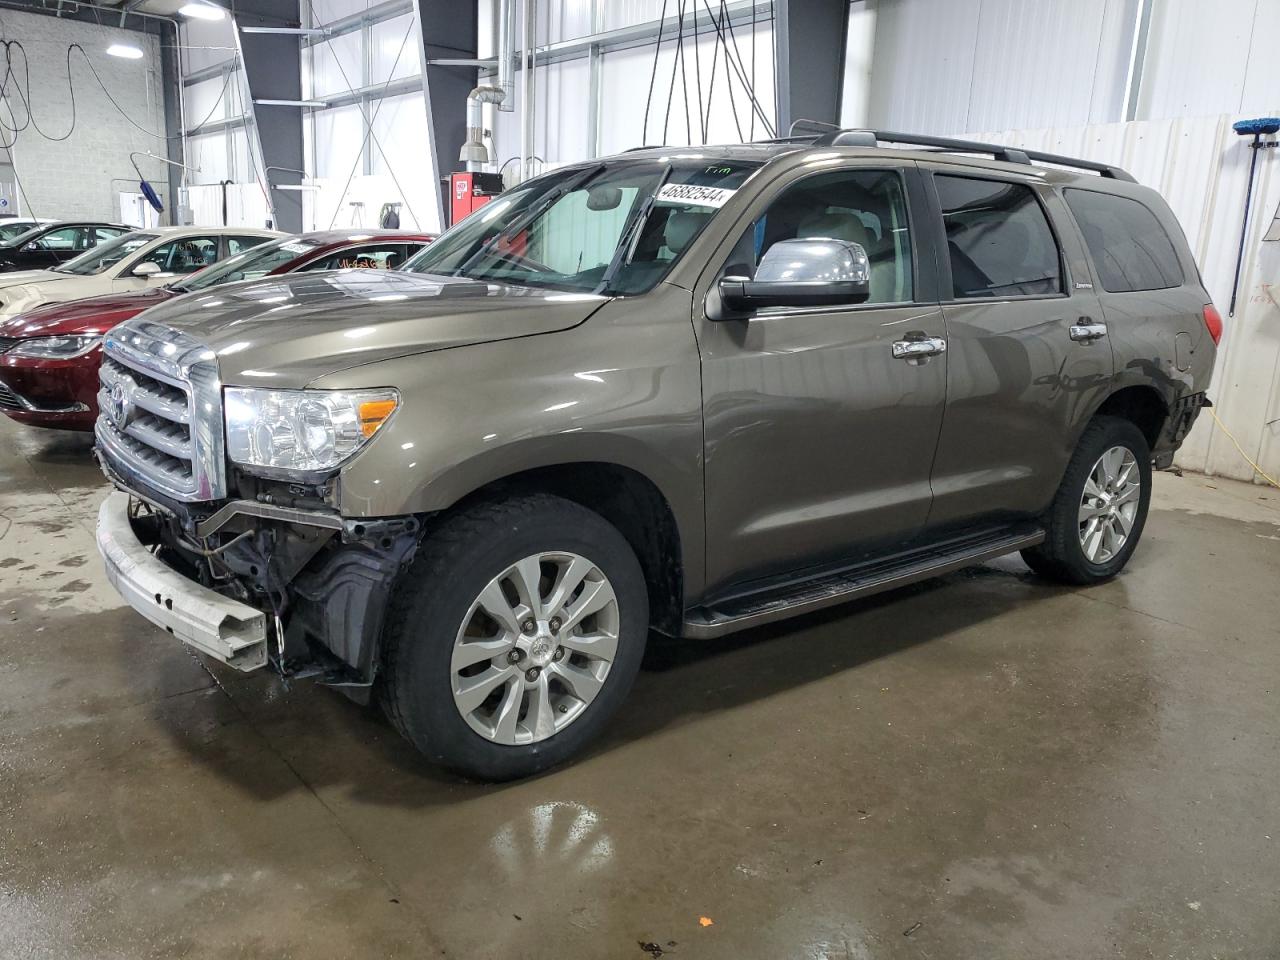 5TDJW5G10DS079106  - TOYOTA SEQUOIA  2013 IMG - 0